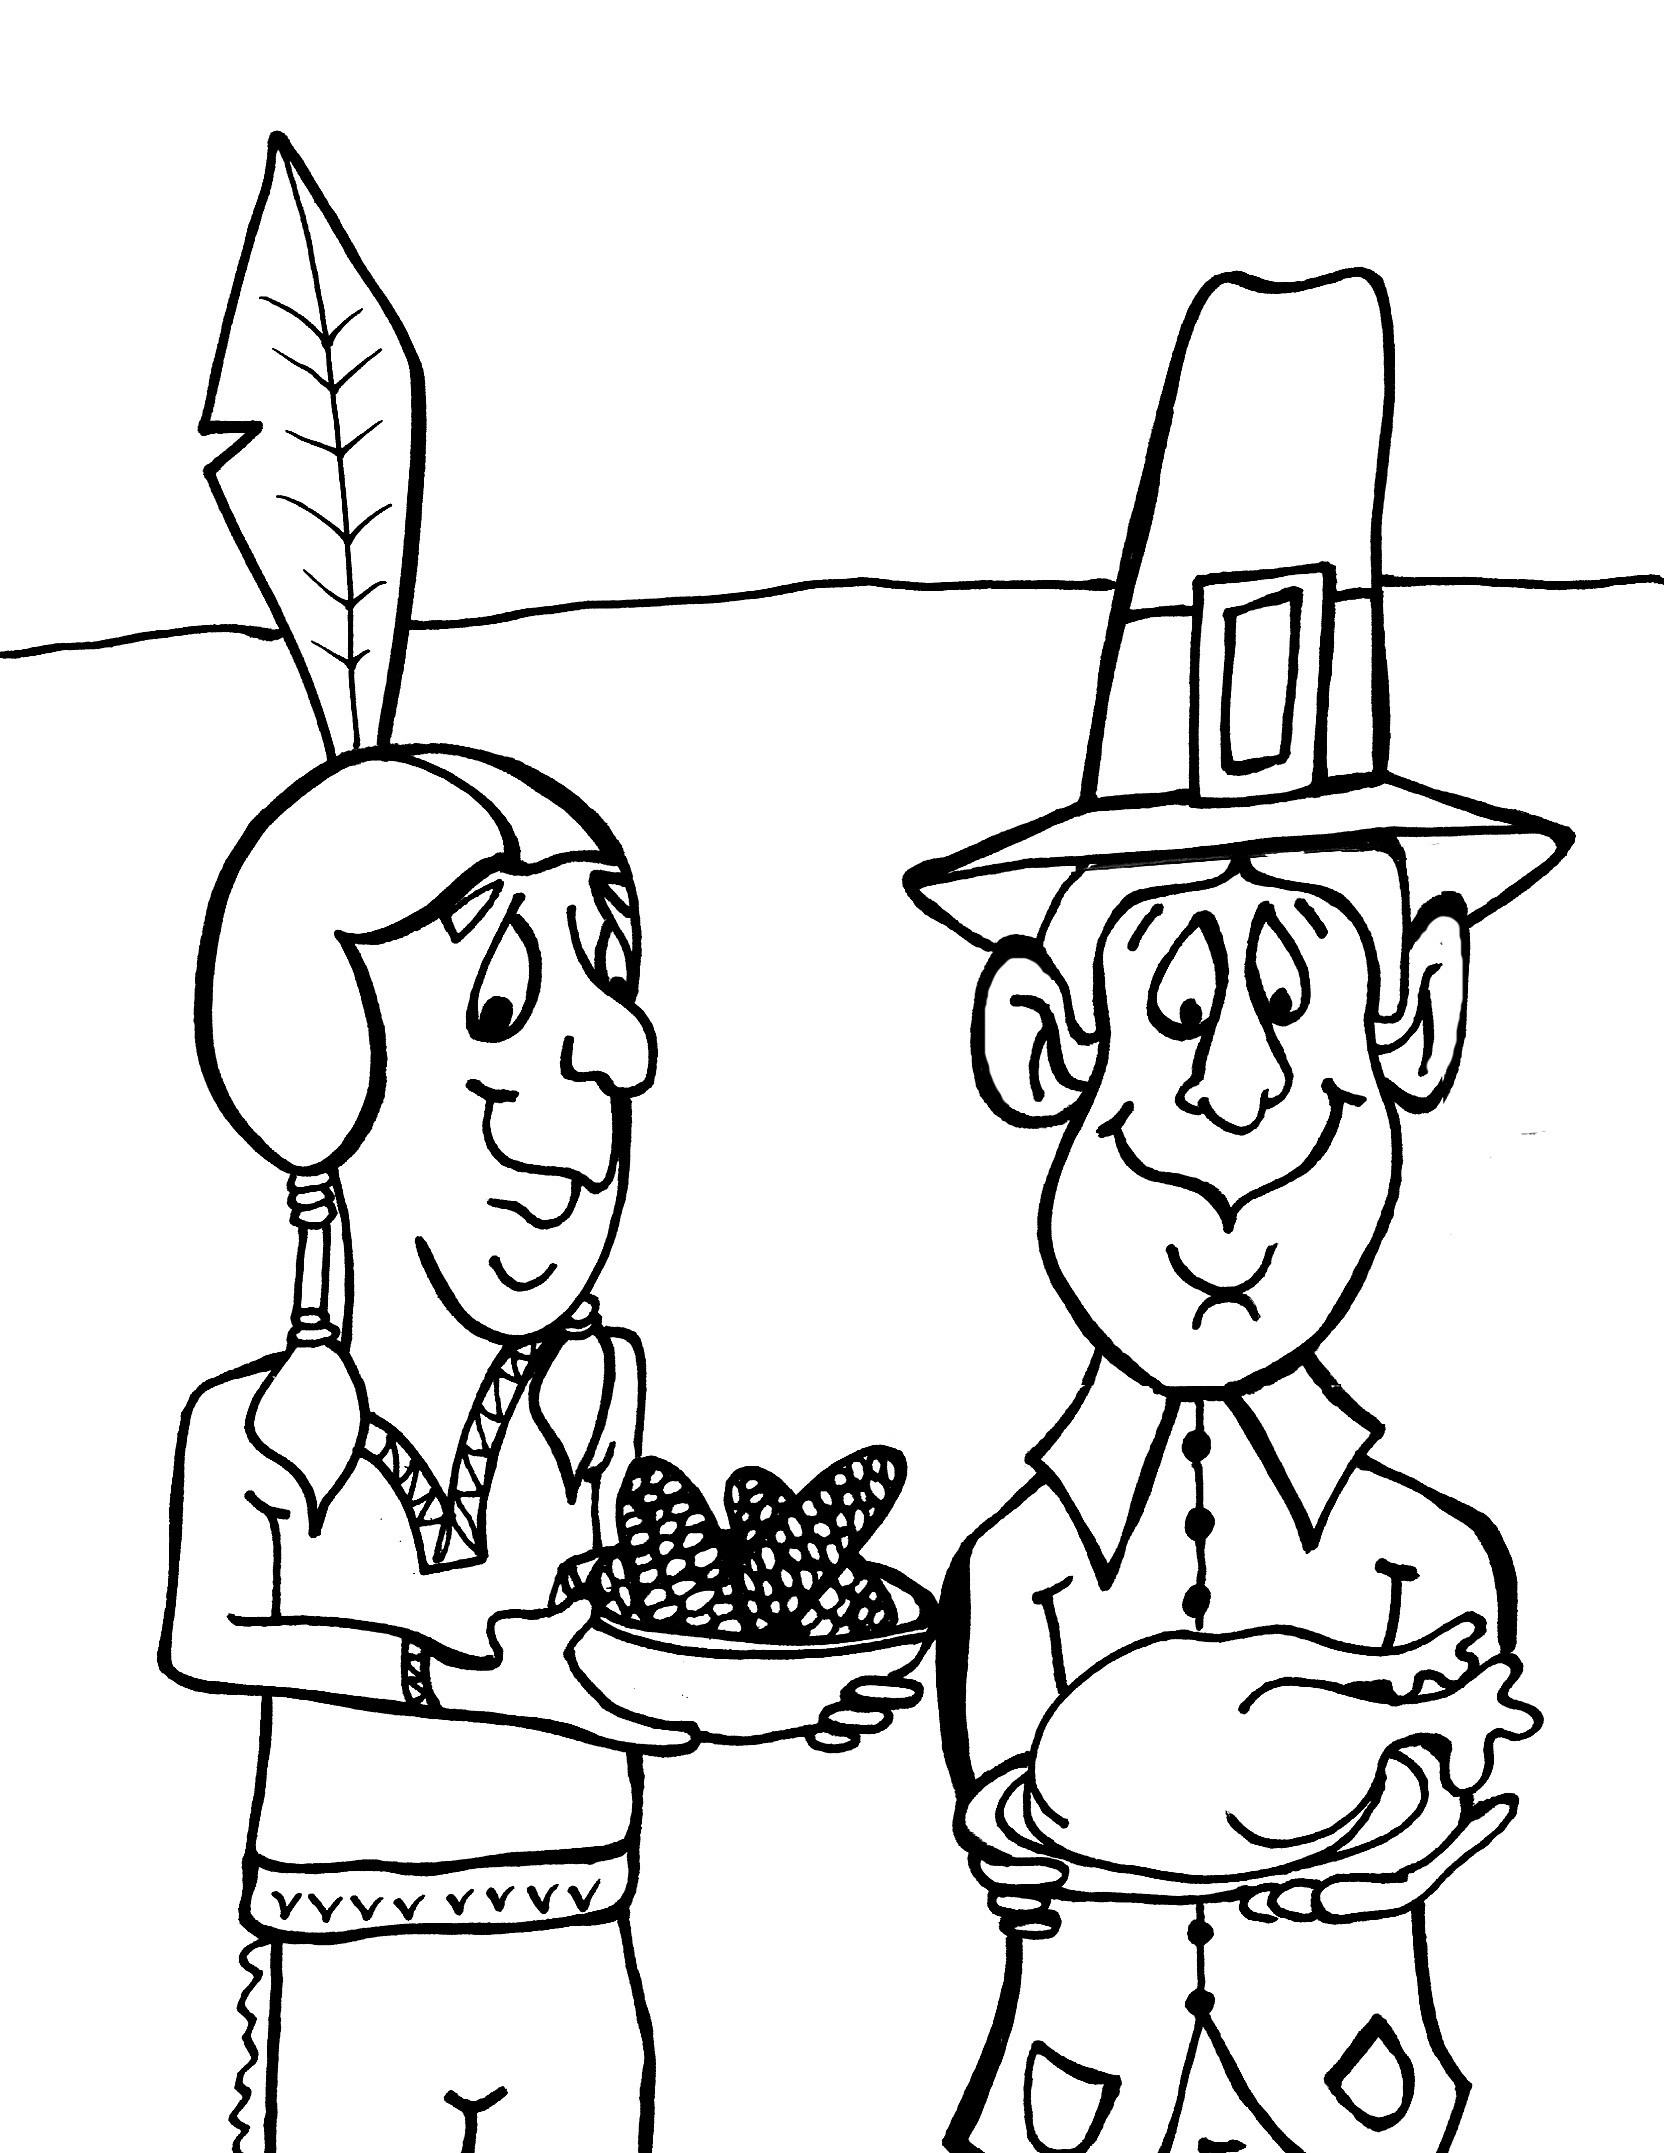 Thanksgiving Coloring For Kids
 Free Printable Thanksgiving Coloring Pages For Kids